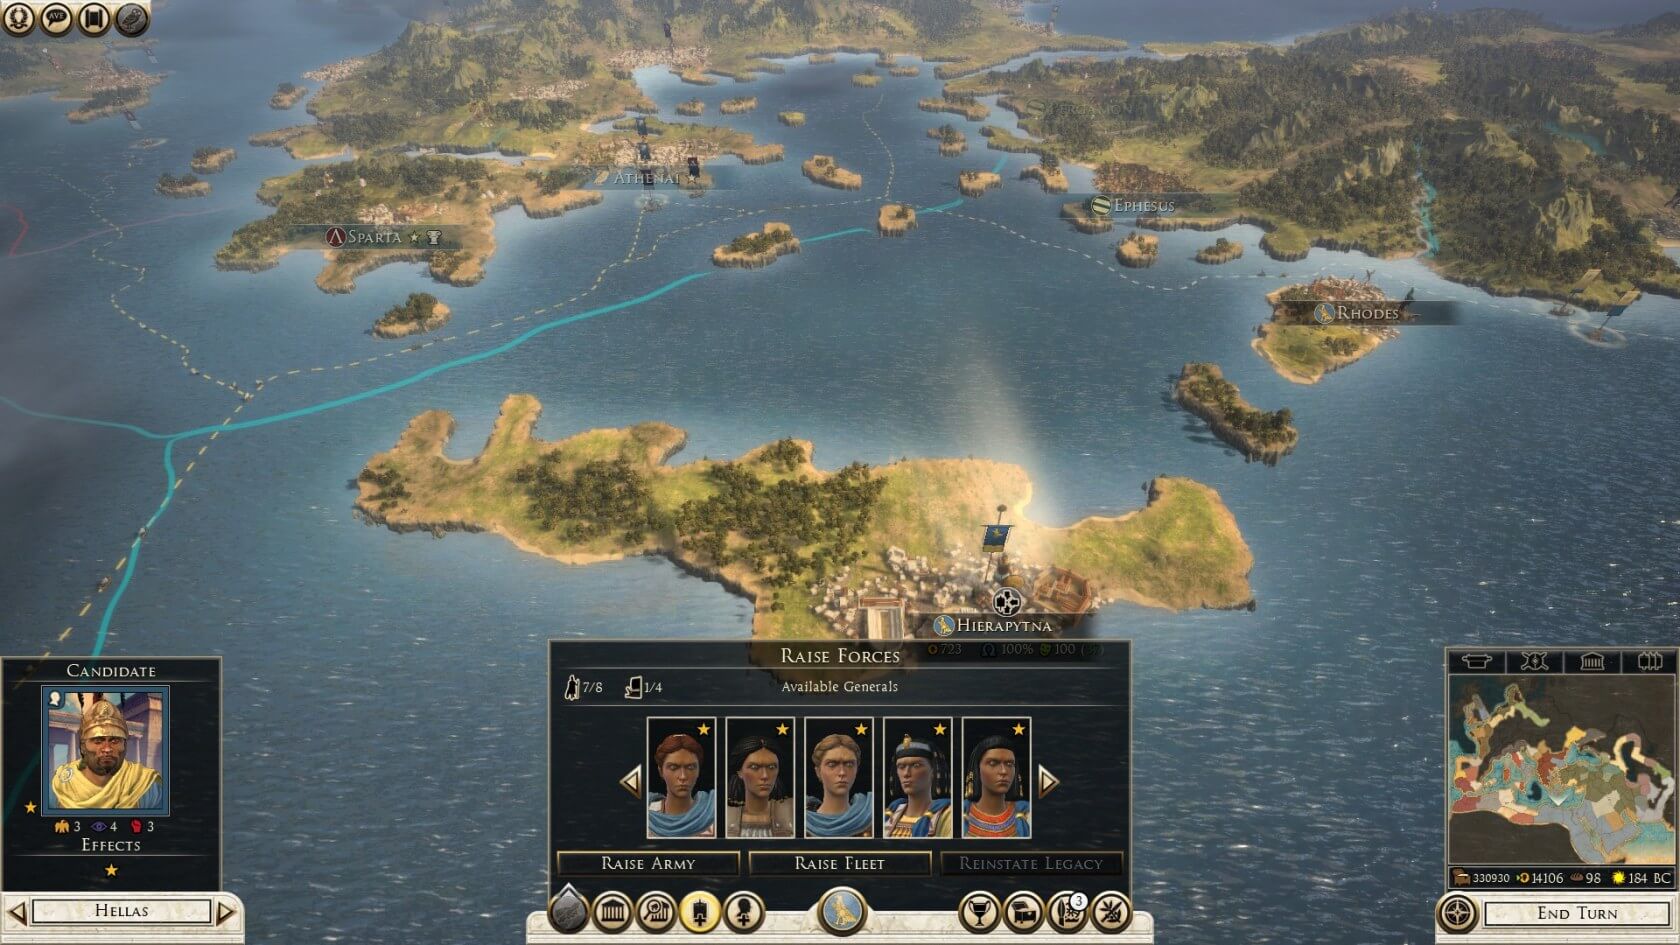 Total War: Rome 2 gets review bombed over female generals